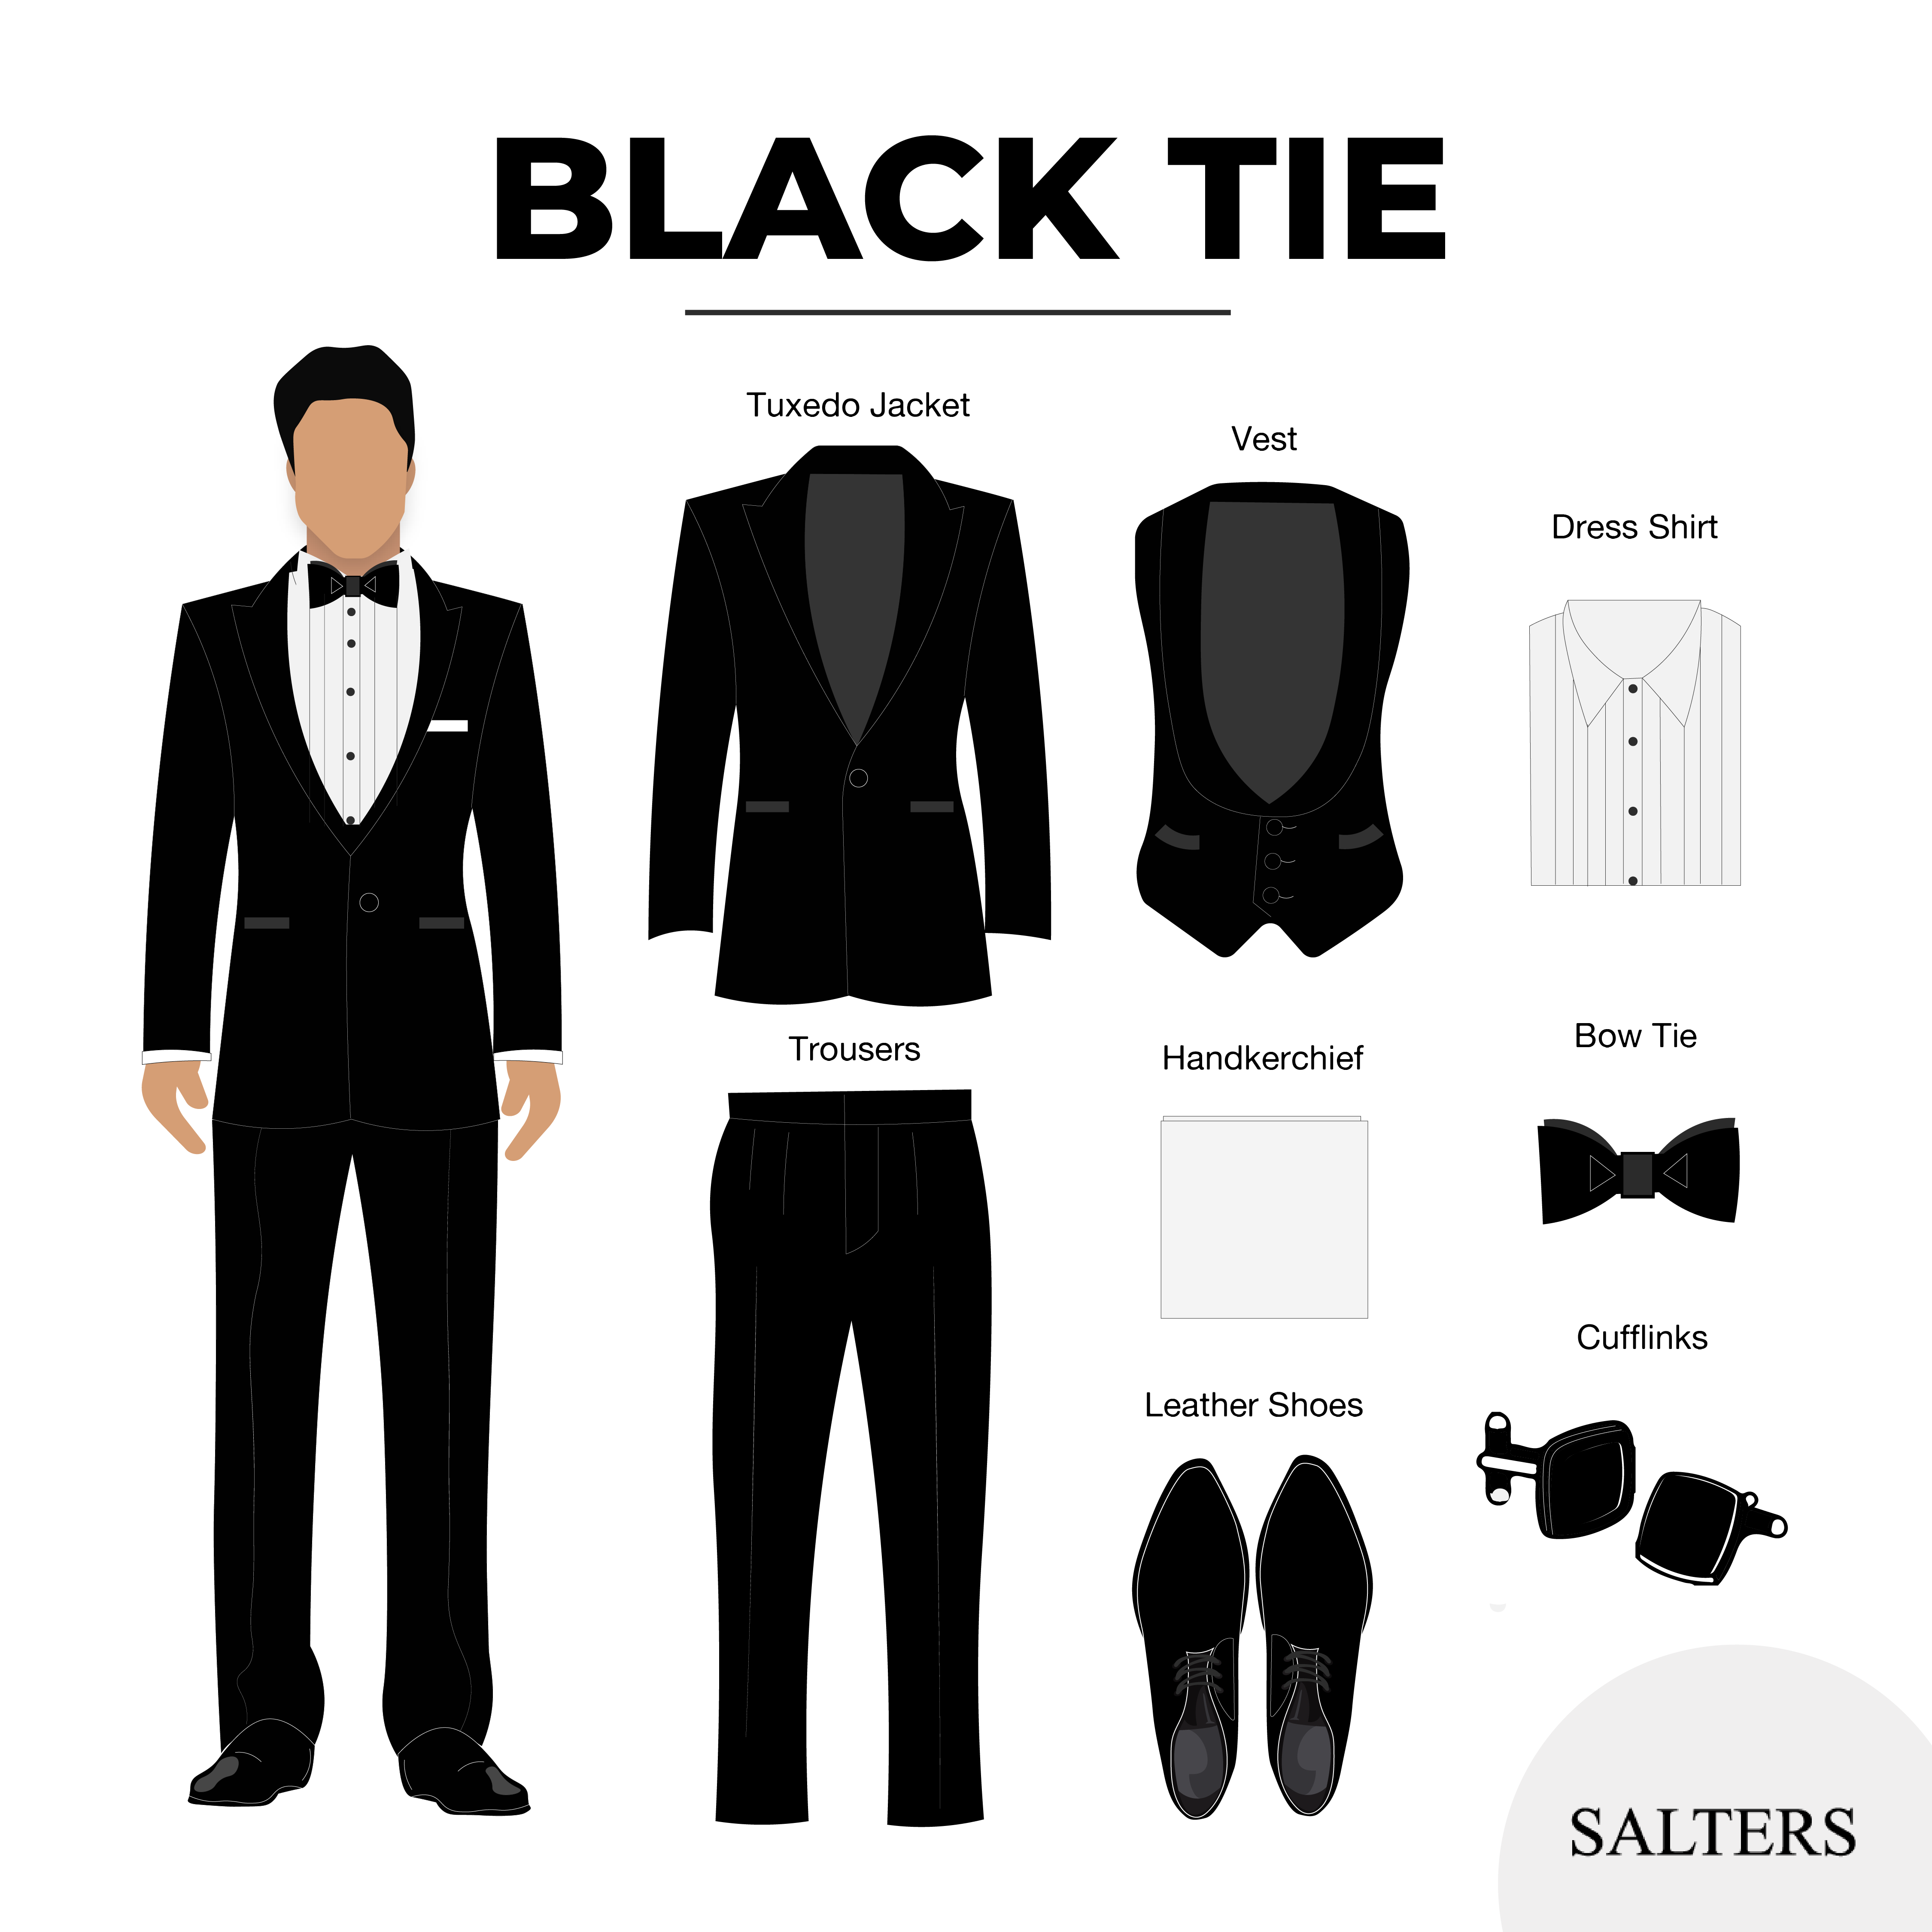 Share more than 121 black tie gowns for wedding - camera.edu.vn